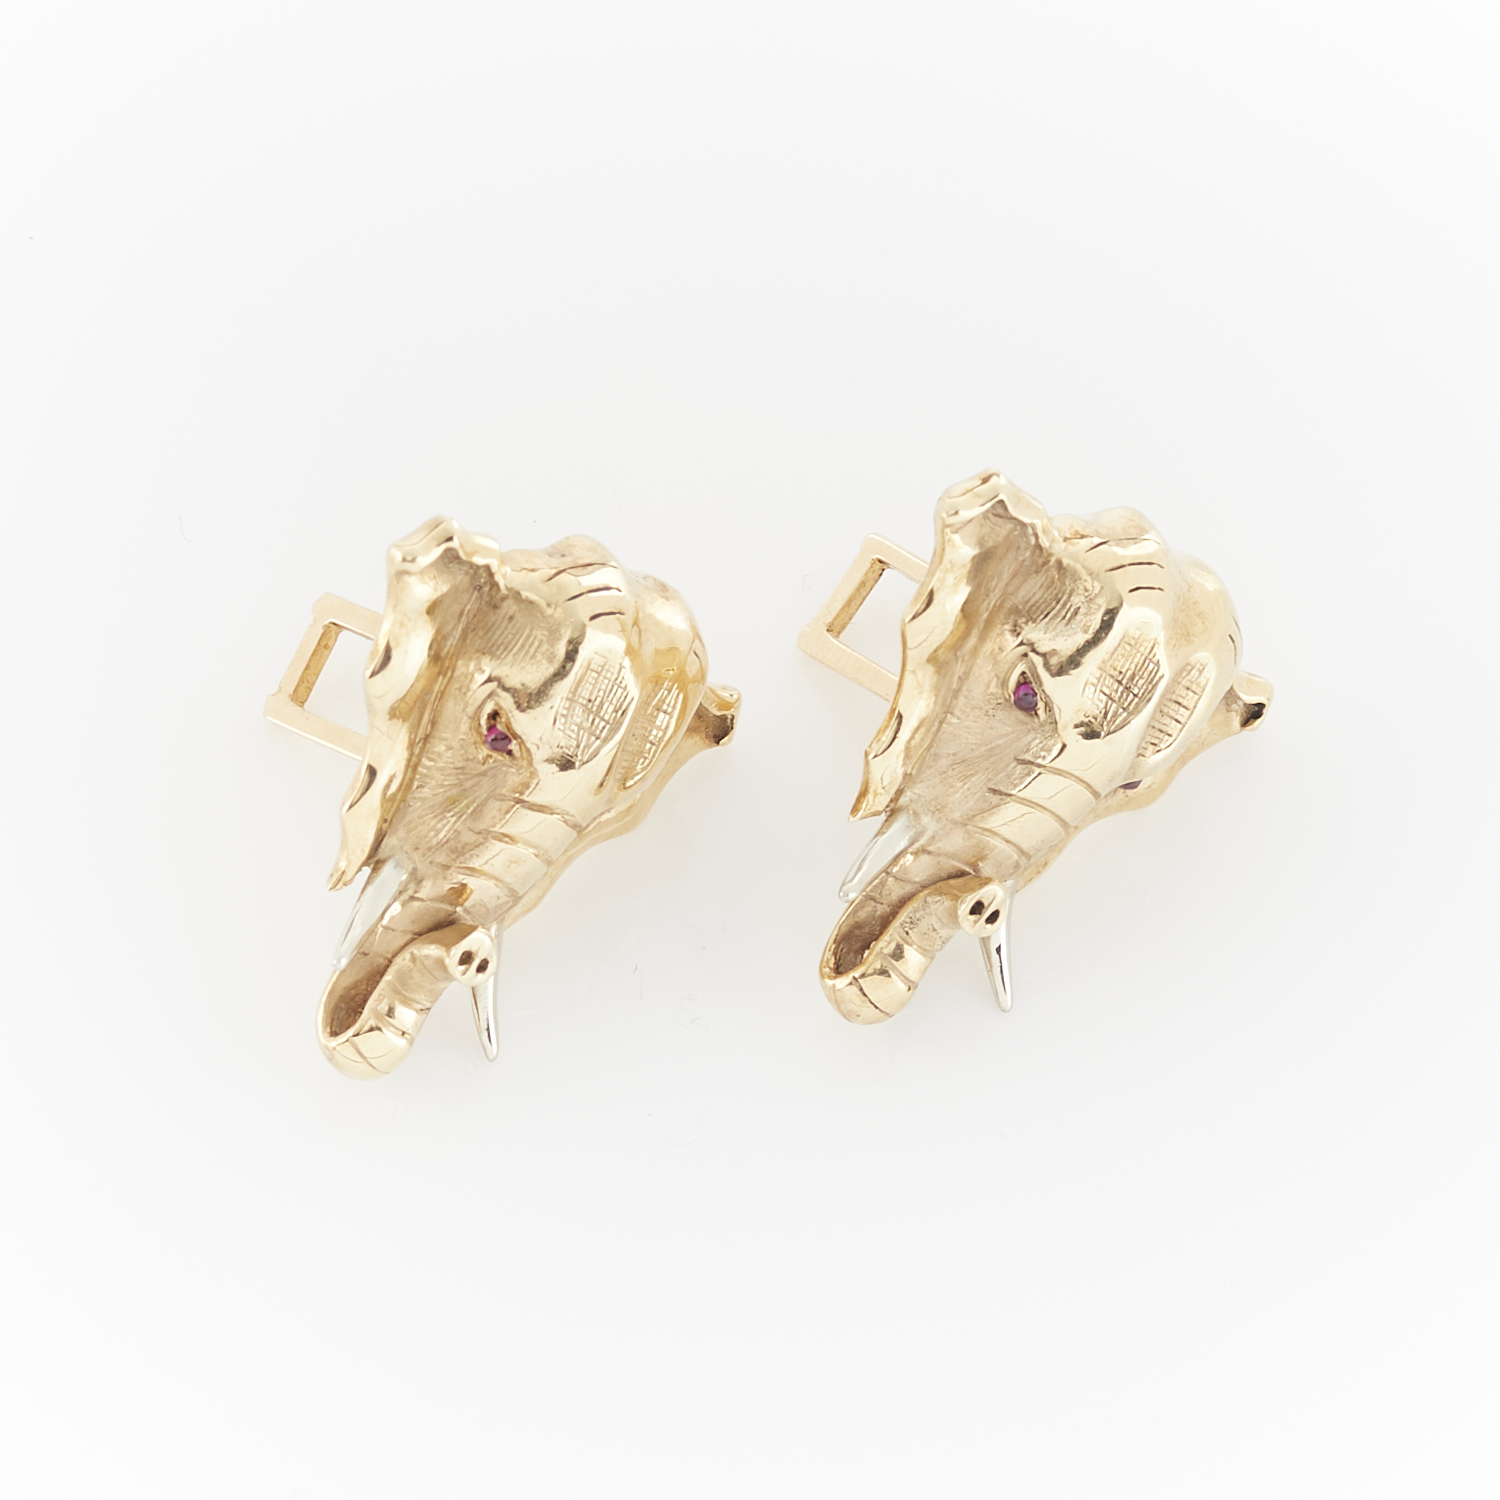 Pair of 14k Elephant Cuff Links - Image 5 of 9